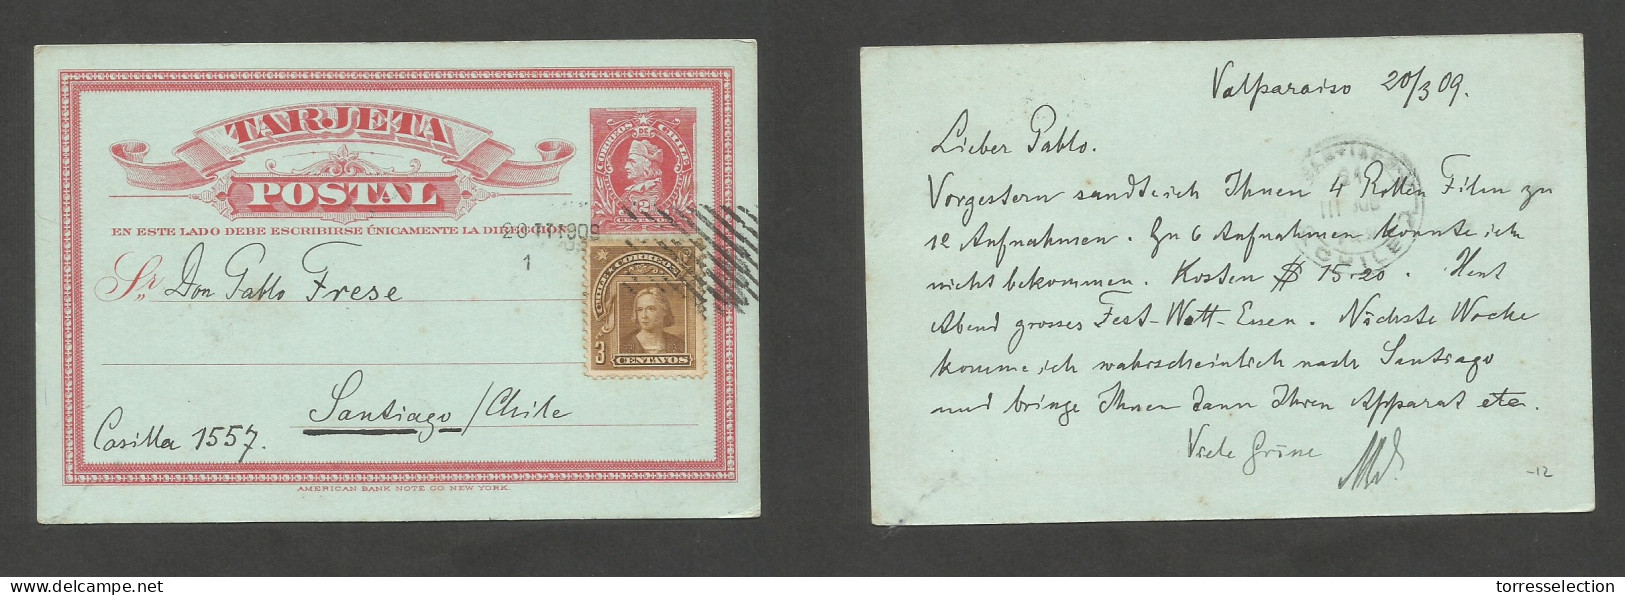 CHILE - Stationery. 1909 (20 March) Valp - Stgo. 2c Red Stat Card + 3c Brown Adtl, Tied Rolling Grill. Nice Item. SALE. - Chile